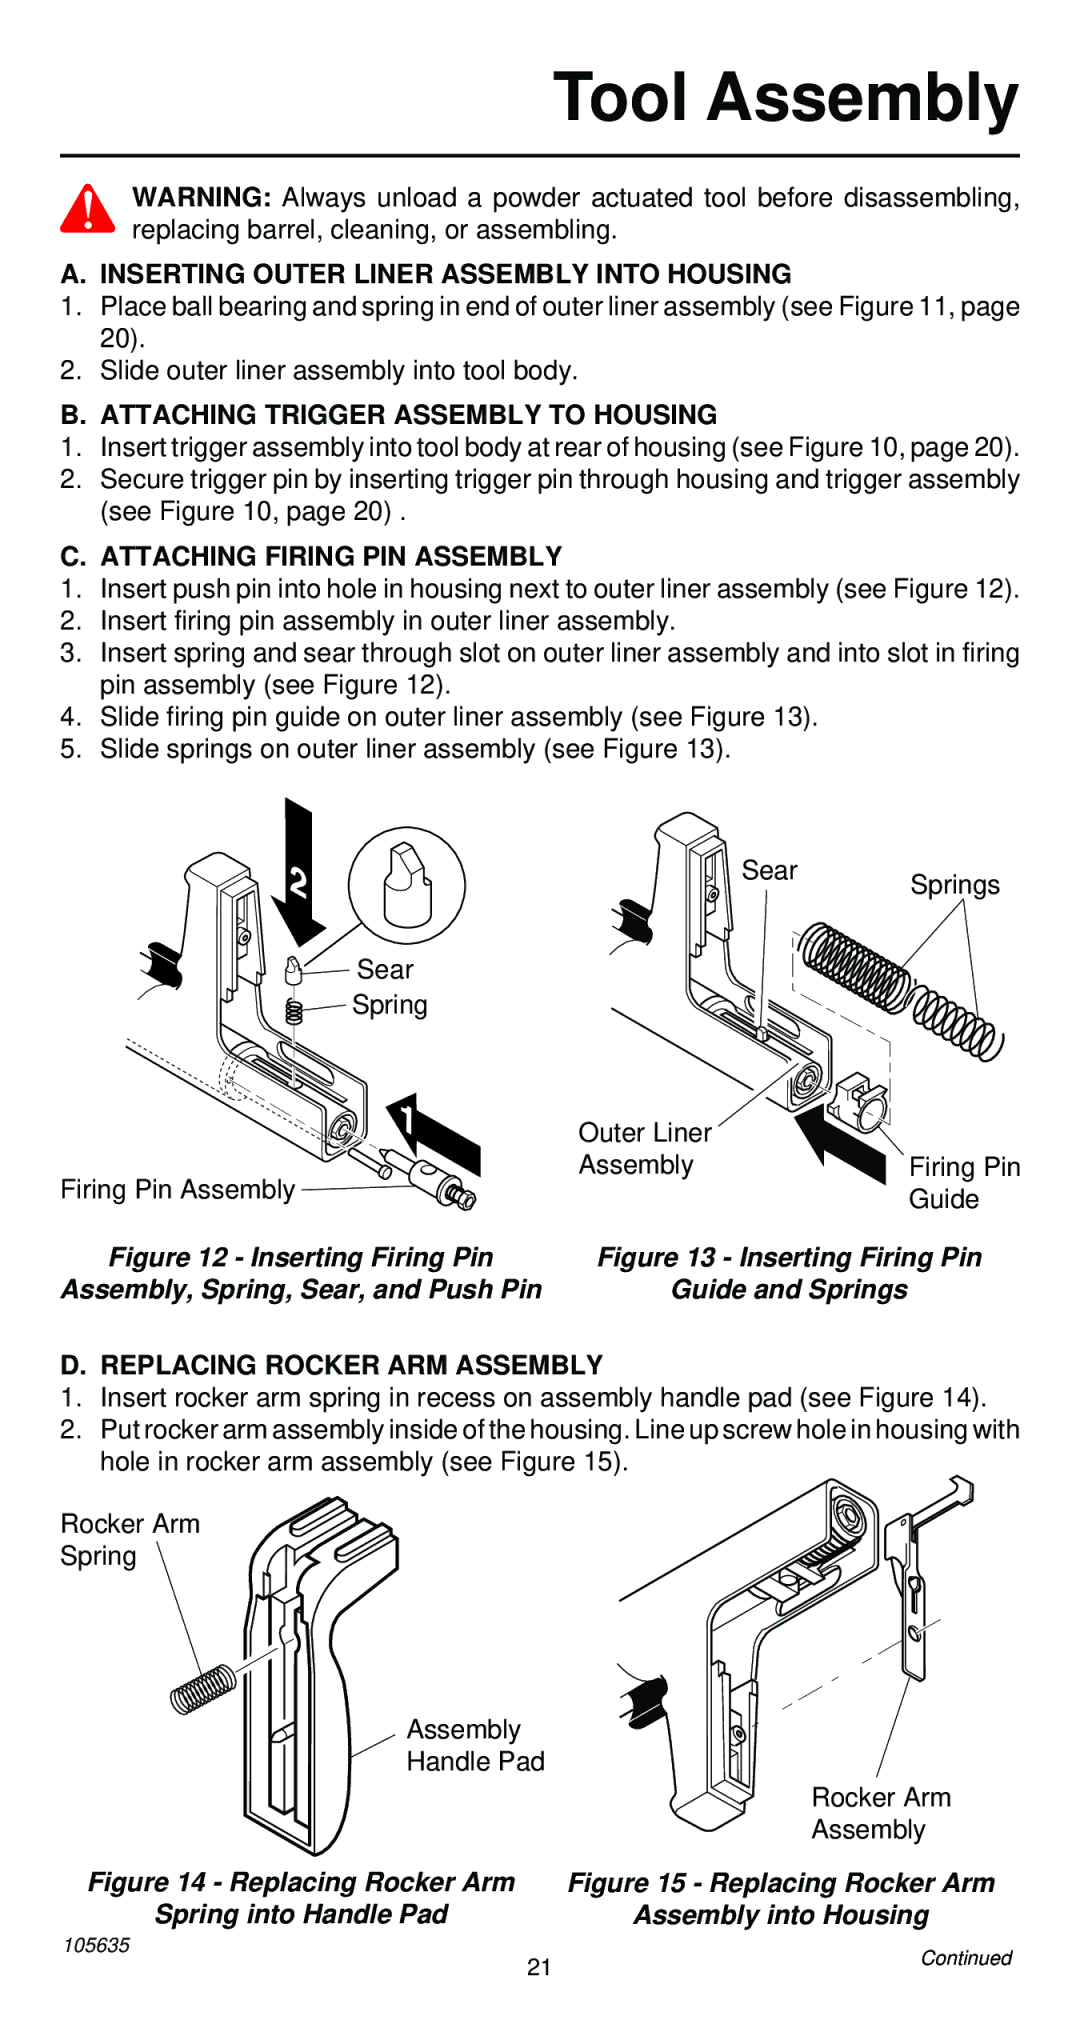 Desa 496 Tool Assembly, Inserting Outer Liner Assembly Into Housing, Attaching Trigger Assembly to Housing 